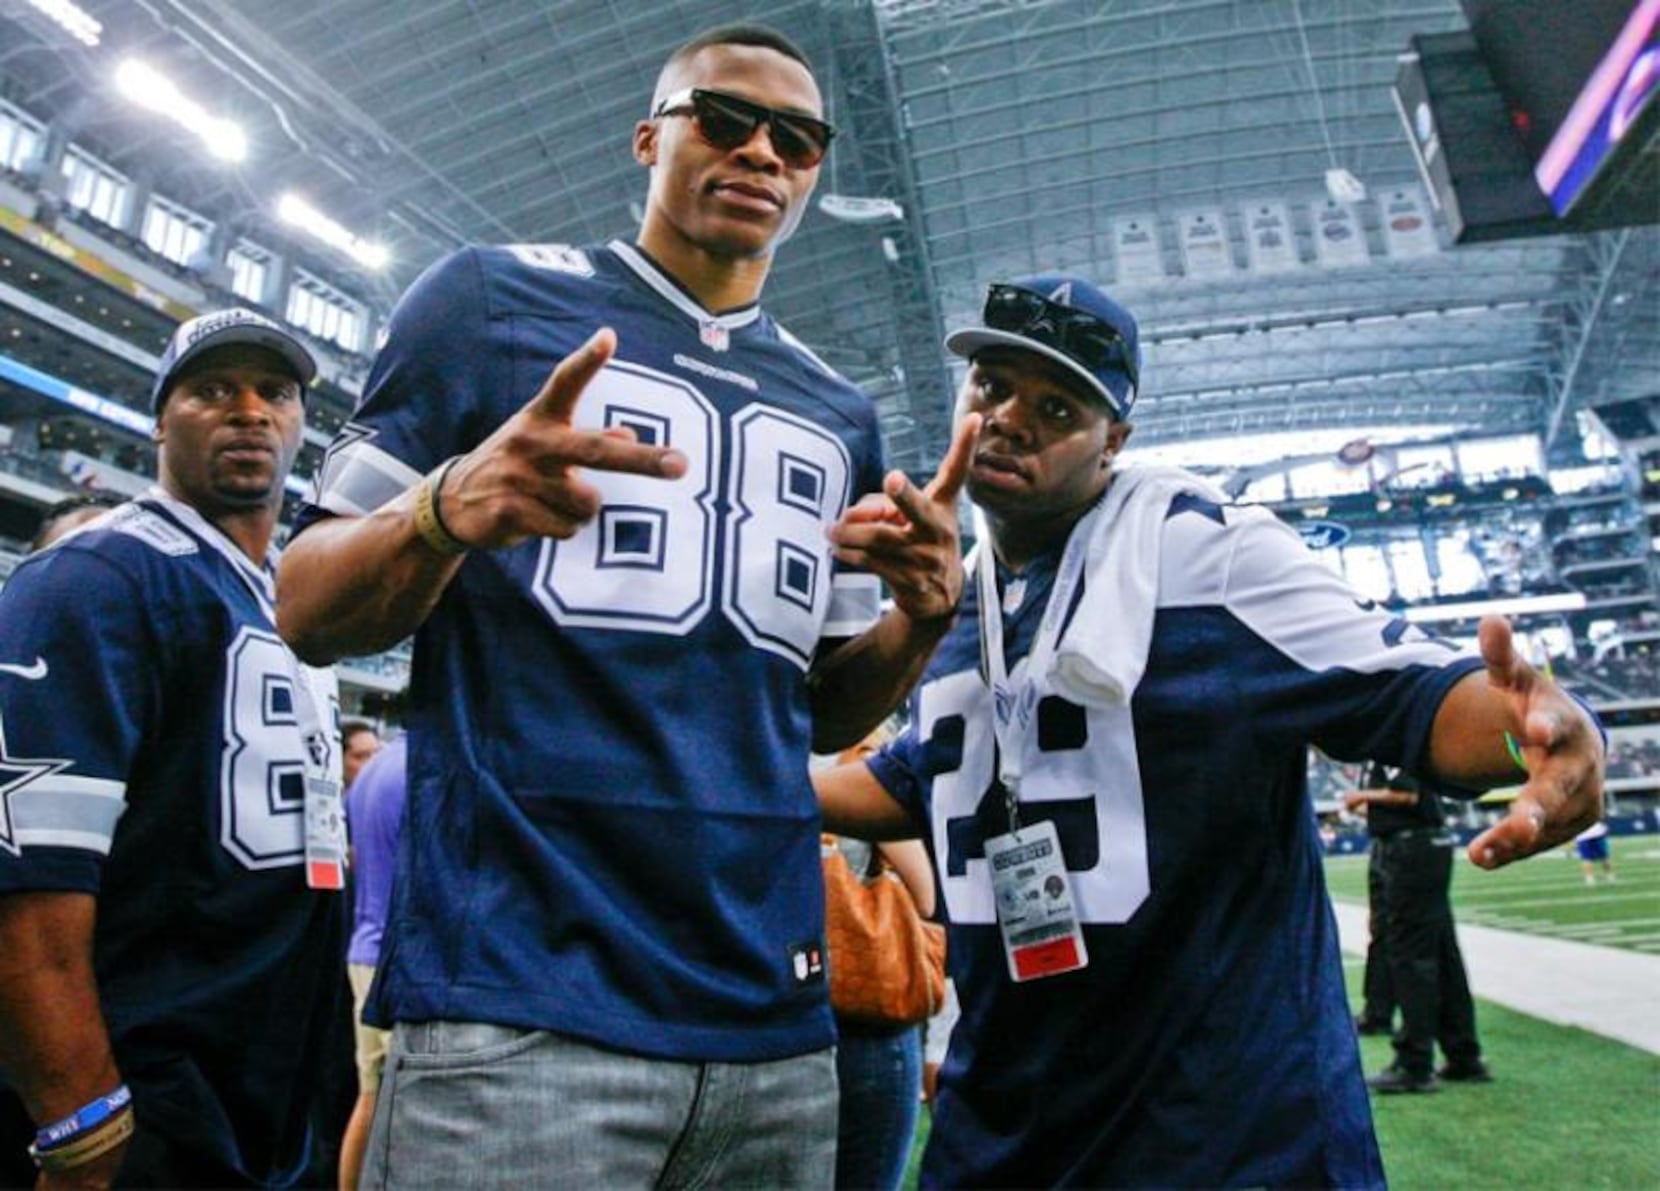 Celebrities who root for the Cowboys including Russell Westbrook, LeBron,  and 'Stone Cold' Steve Austin